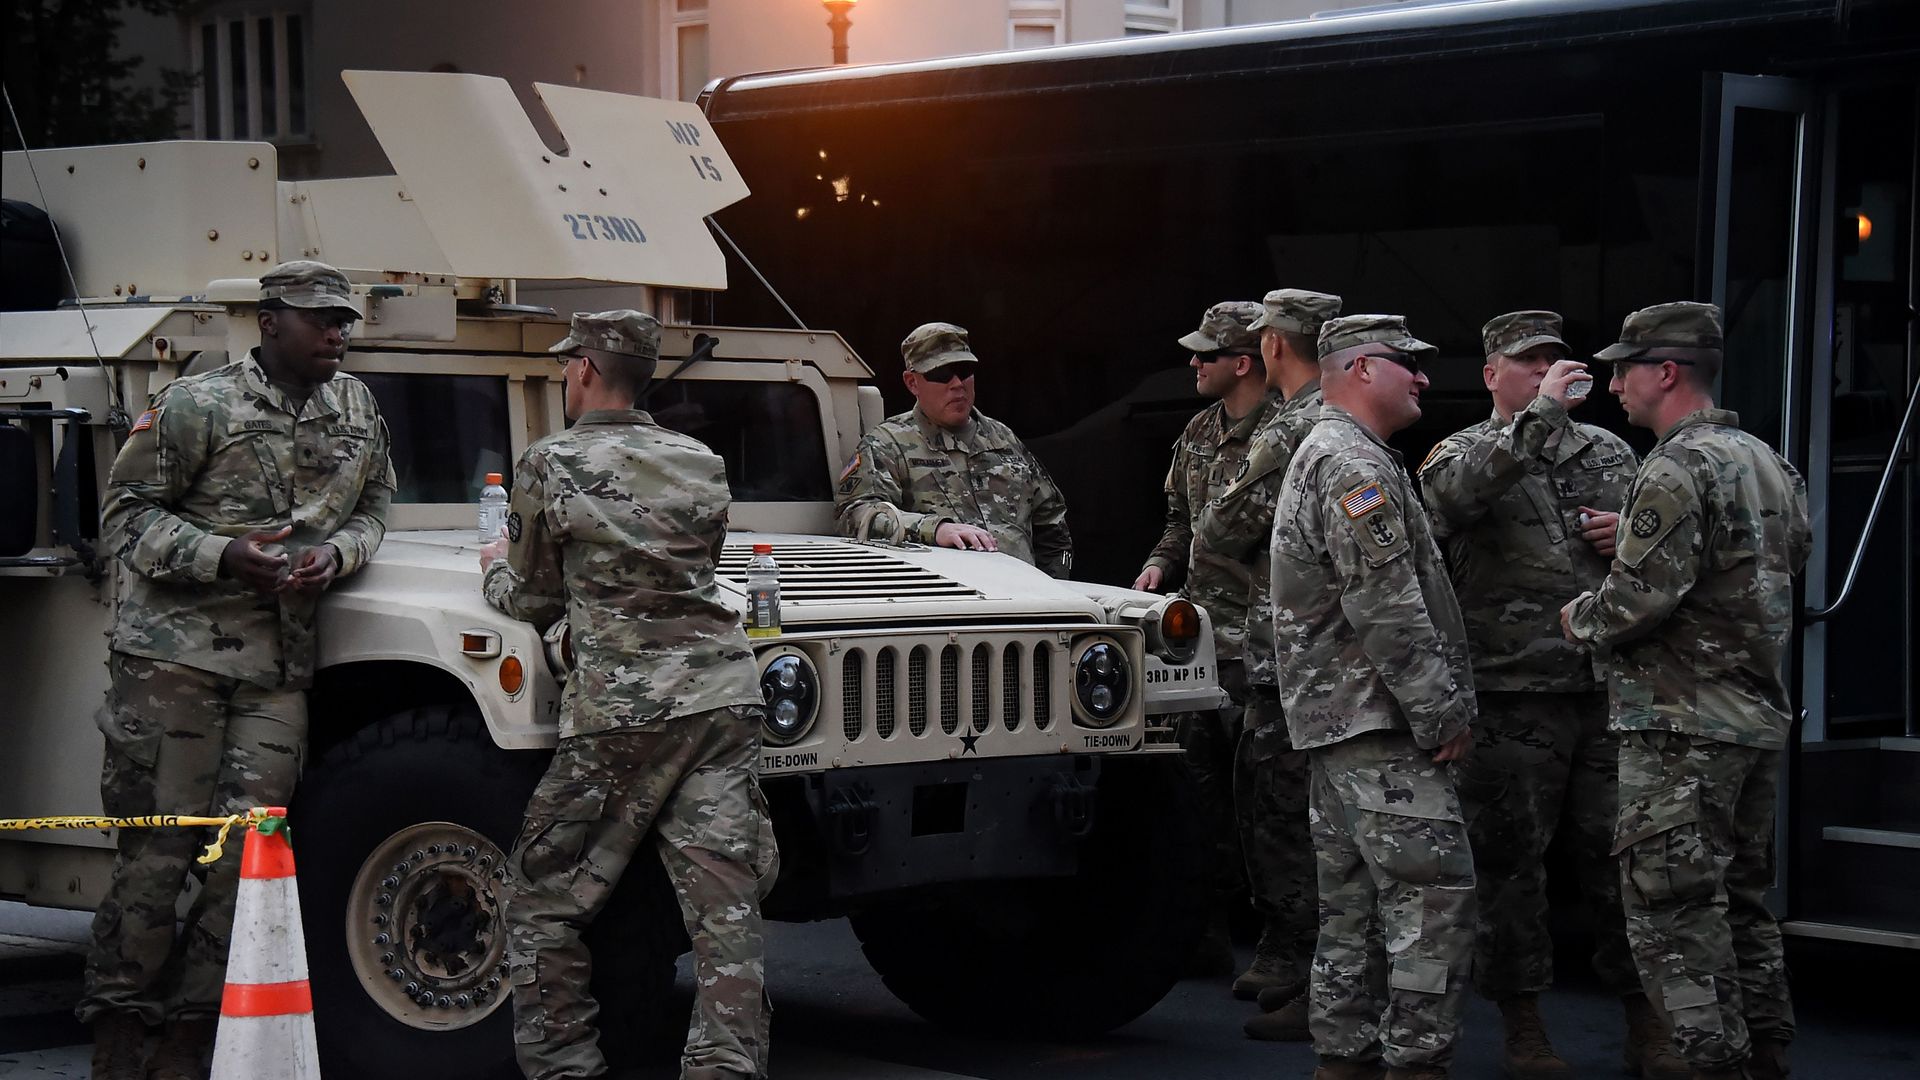 Members of the U.S. National Guard in D.C. on June 7.